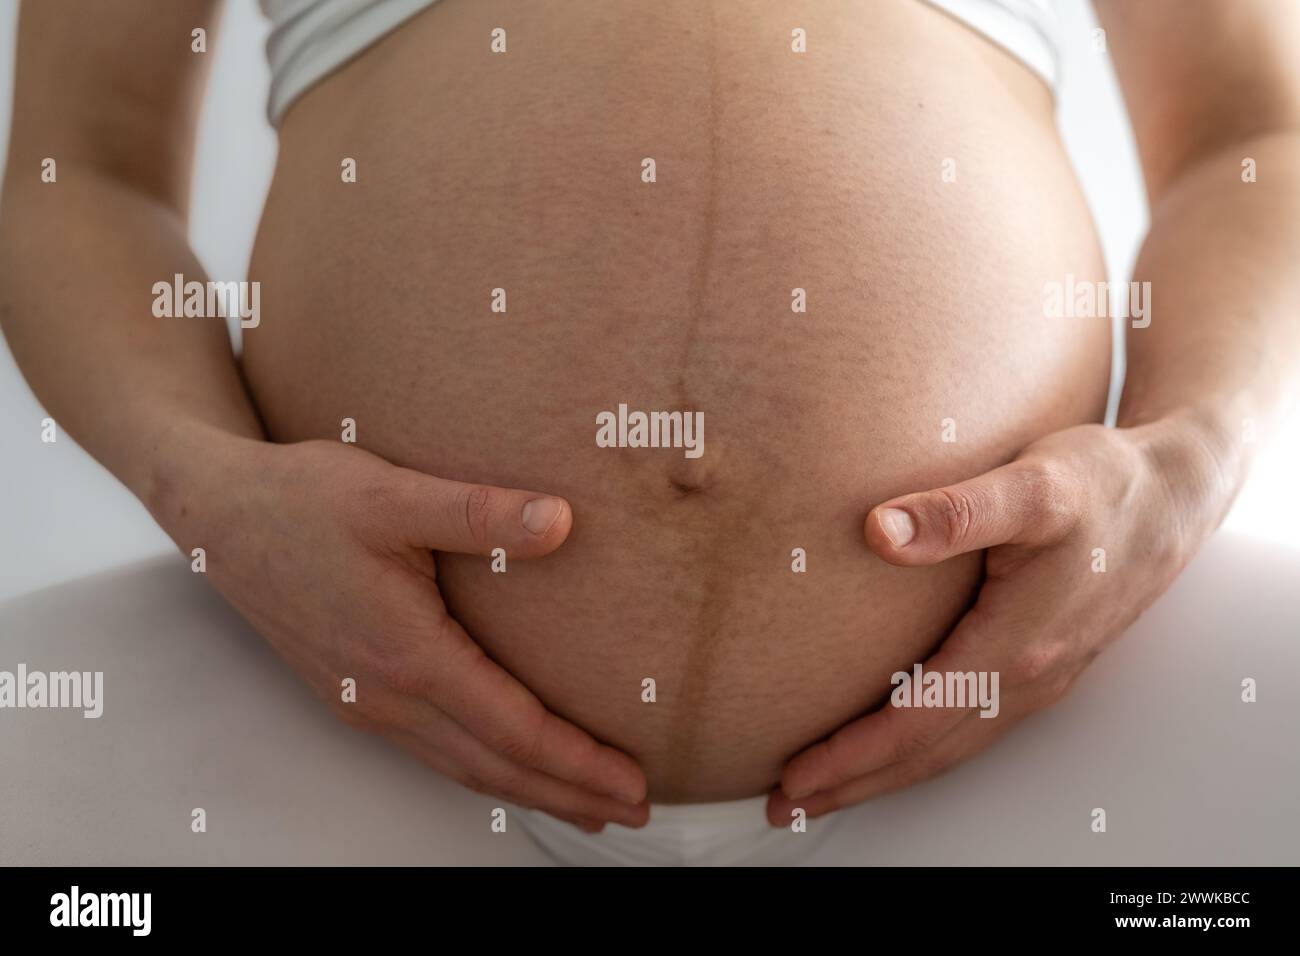 Description: Closeup of woman sitting and gently holding her very round pregnant baby belly. Front view. White background. Bright shot. Stock Photo